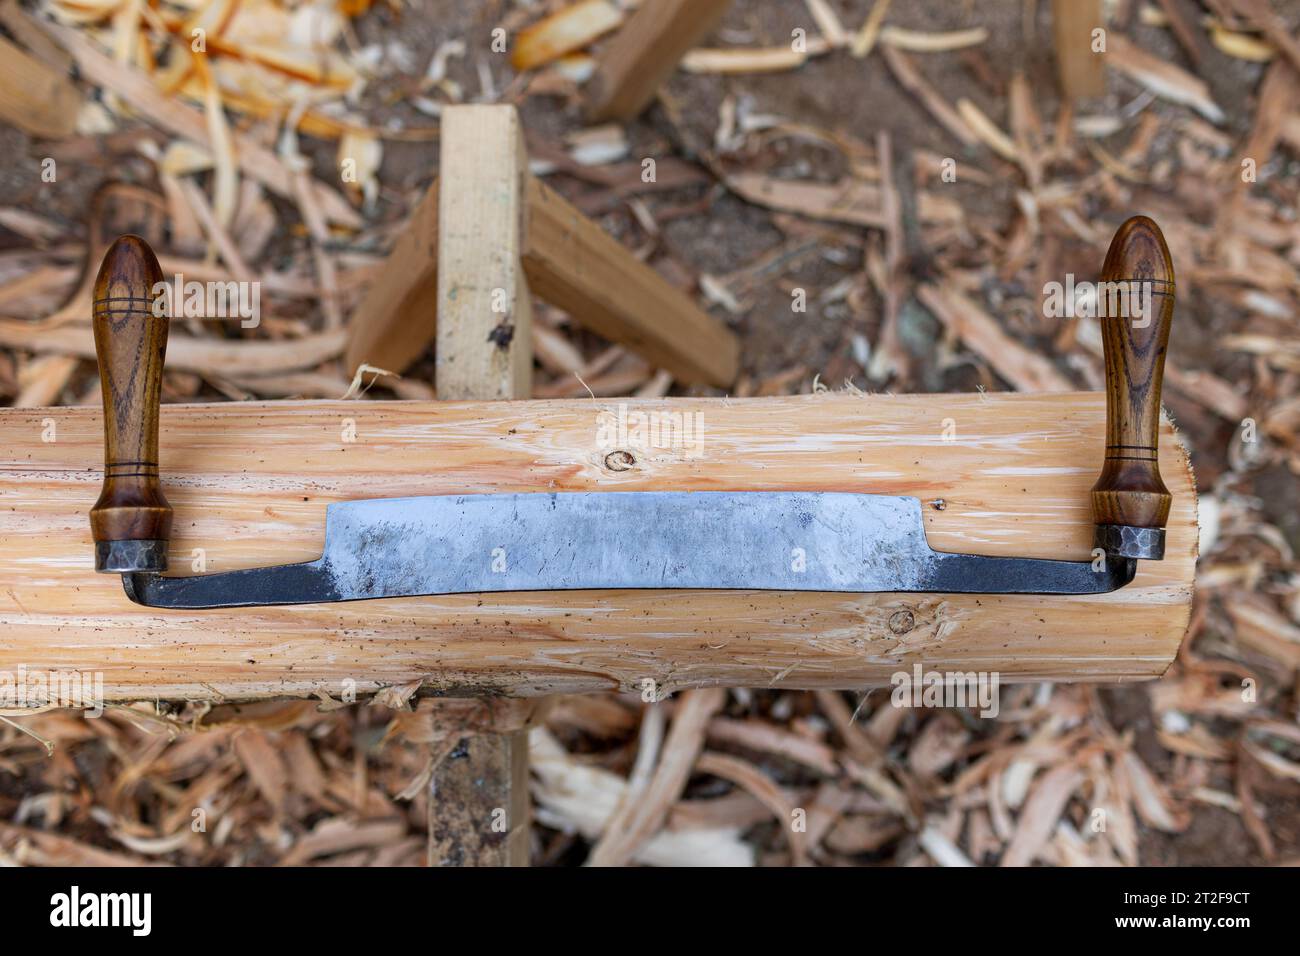 A woodworking tool designed for peeling wood Stock Photo